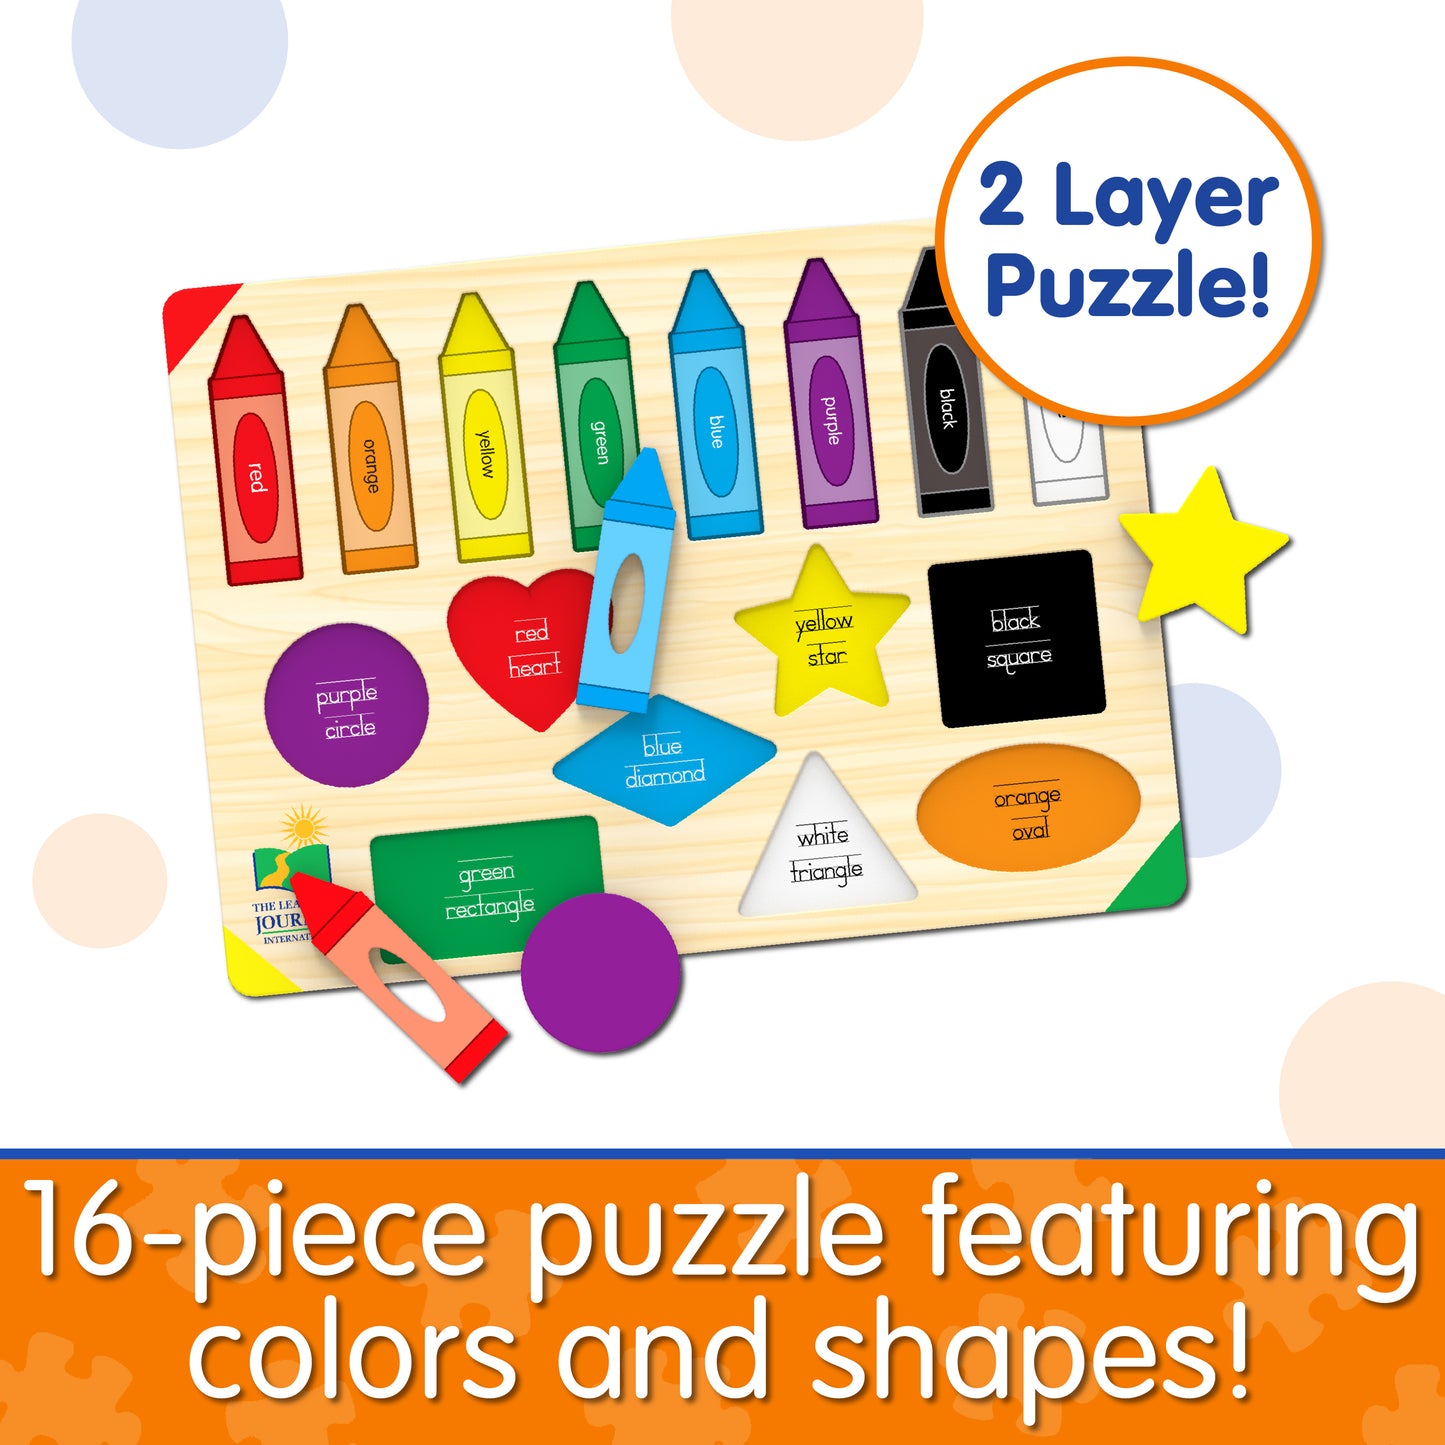 Infographic of Lift and Learn Colors and Shapes Puzzle that reads, "16-piece puzzle featuring colors and shapes!"